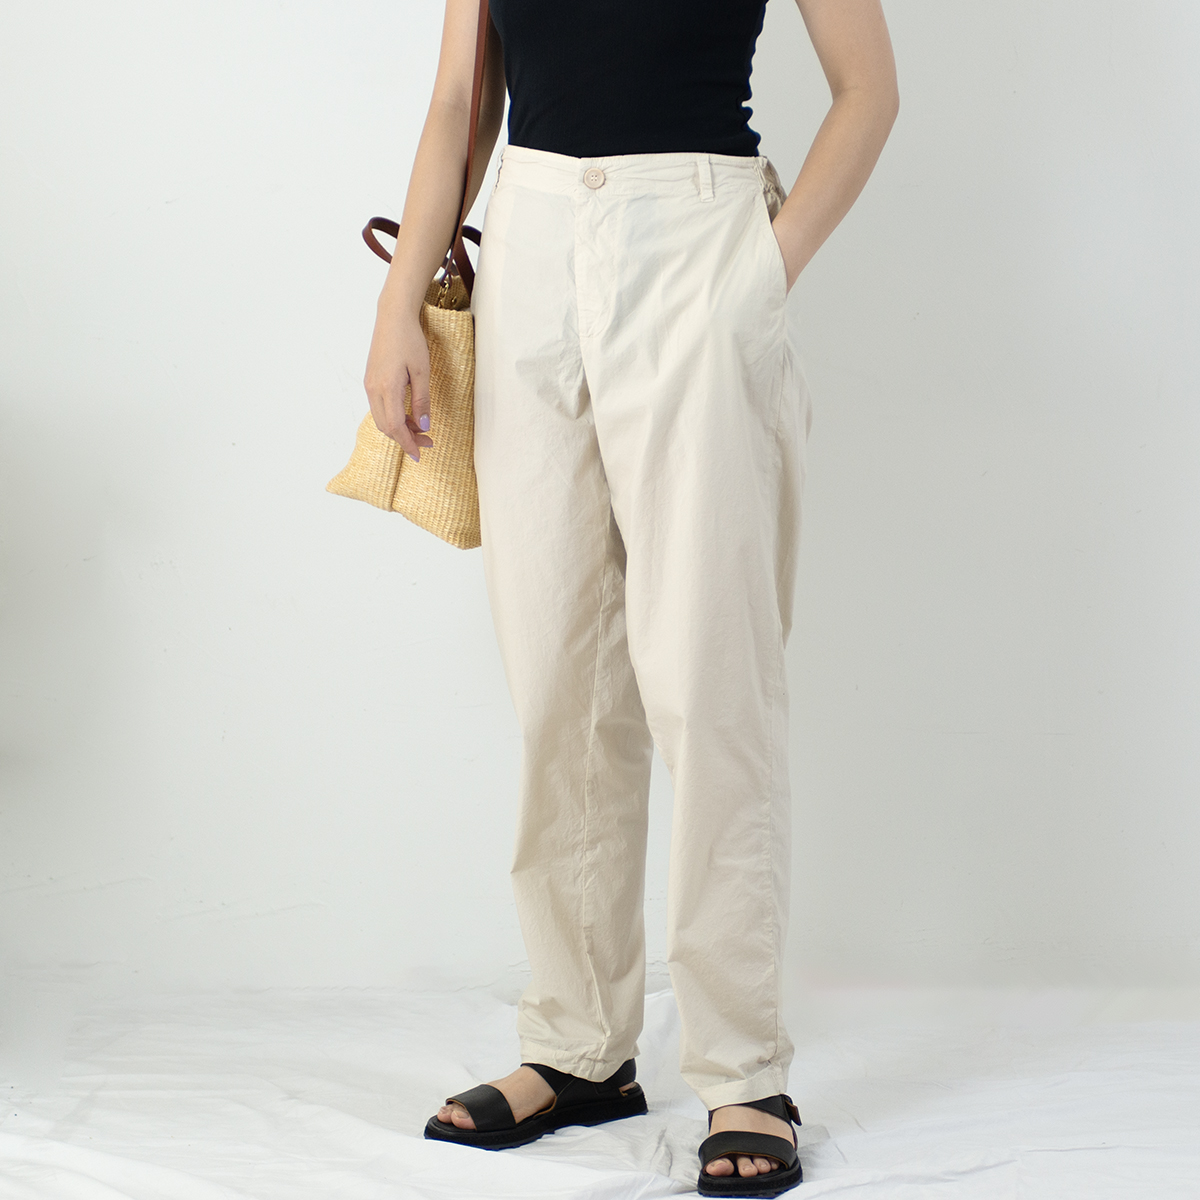 Bsbee Pasco Pant